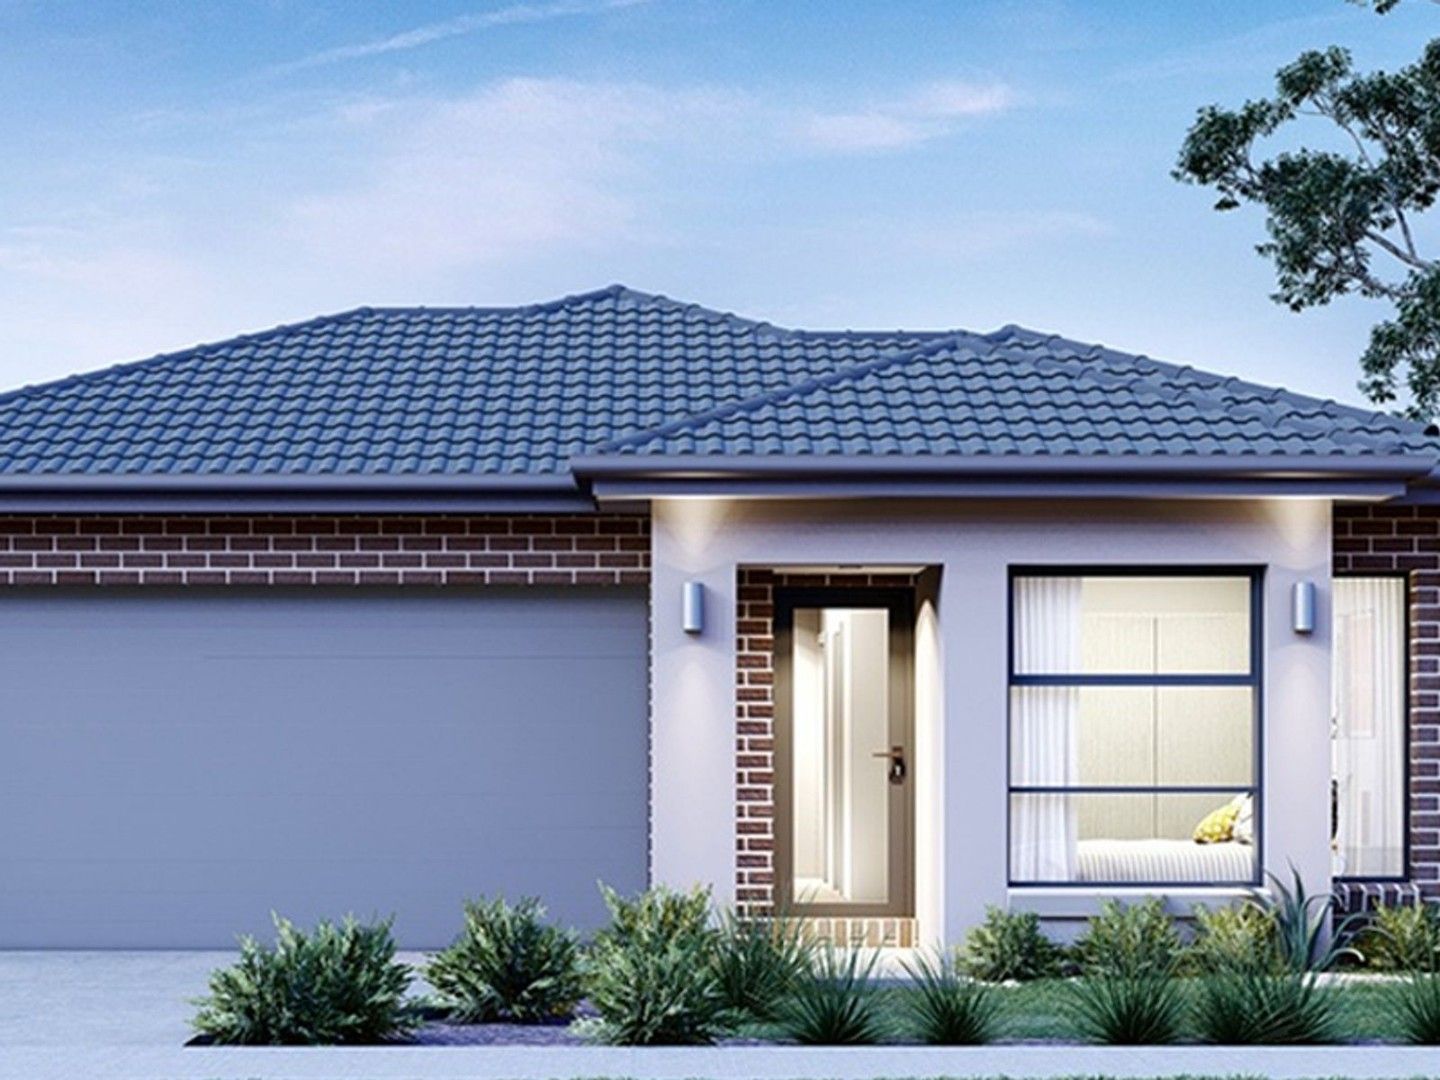 3 bedrooms New House & Land in 22261/22261 Hardys Road CLYDE NORTH VIC, 3978